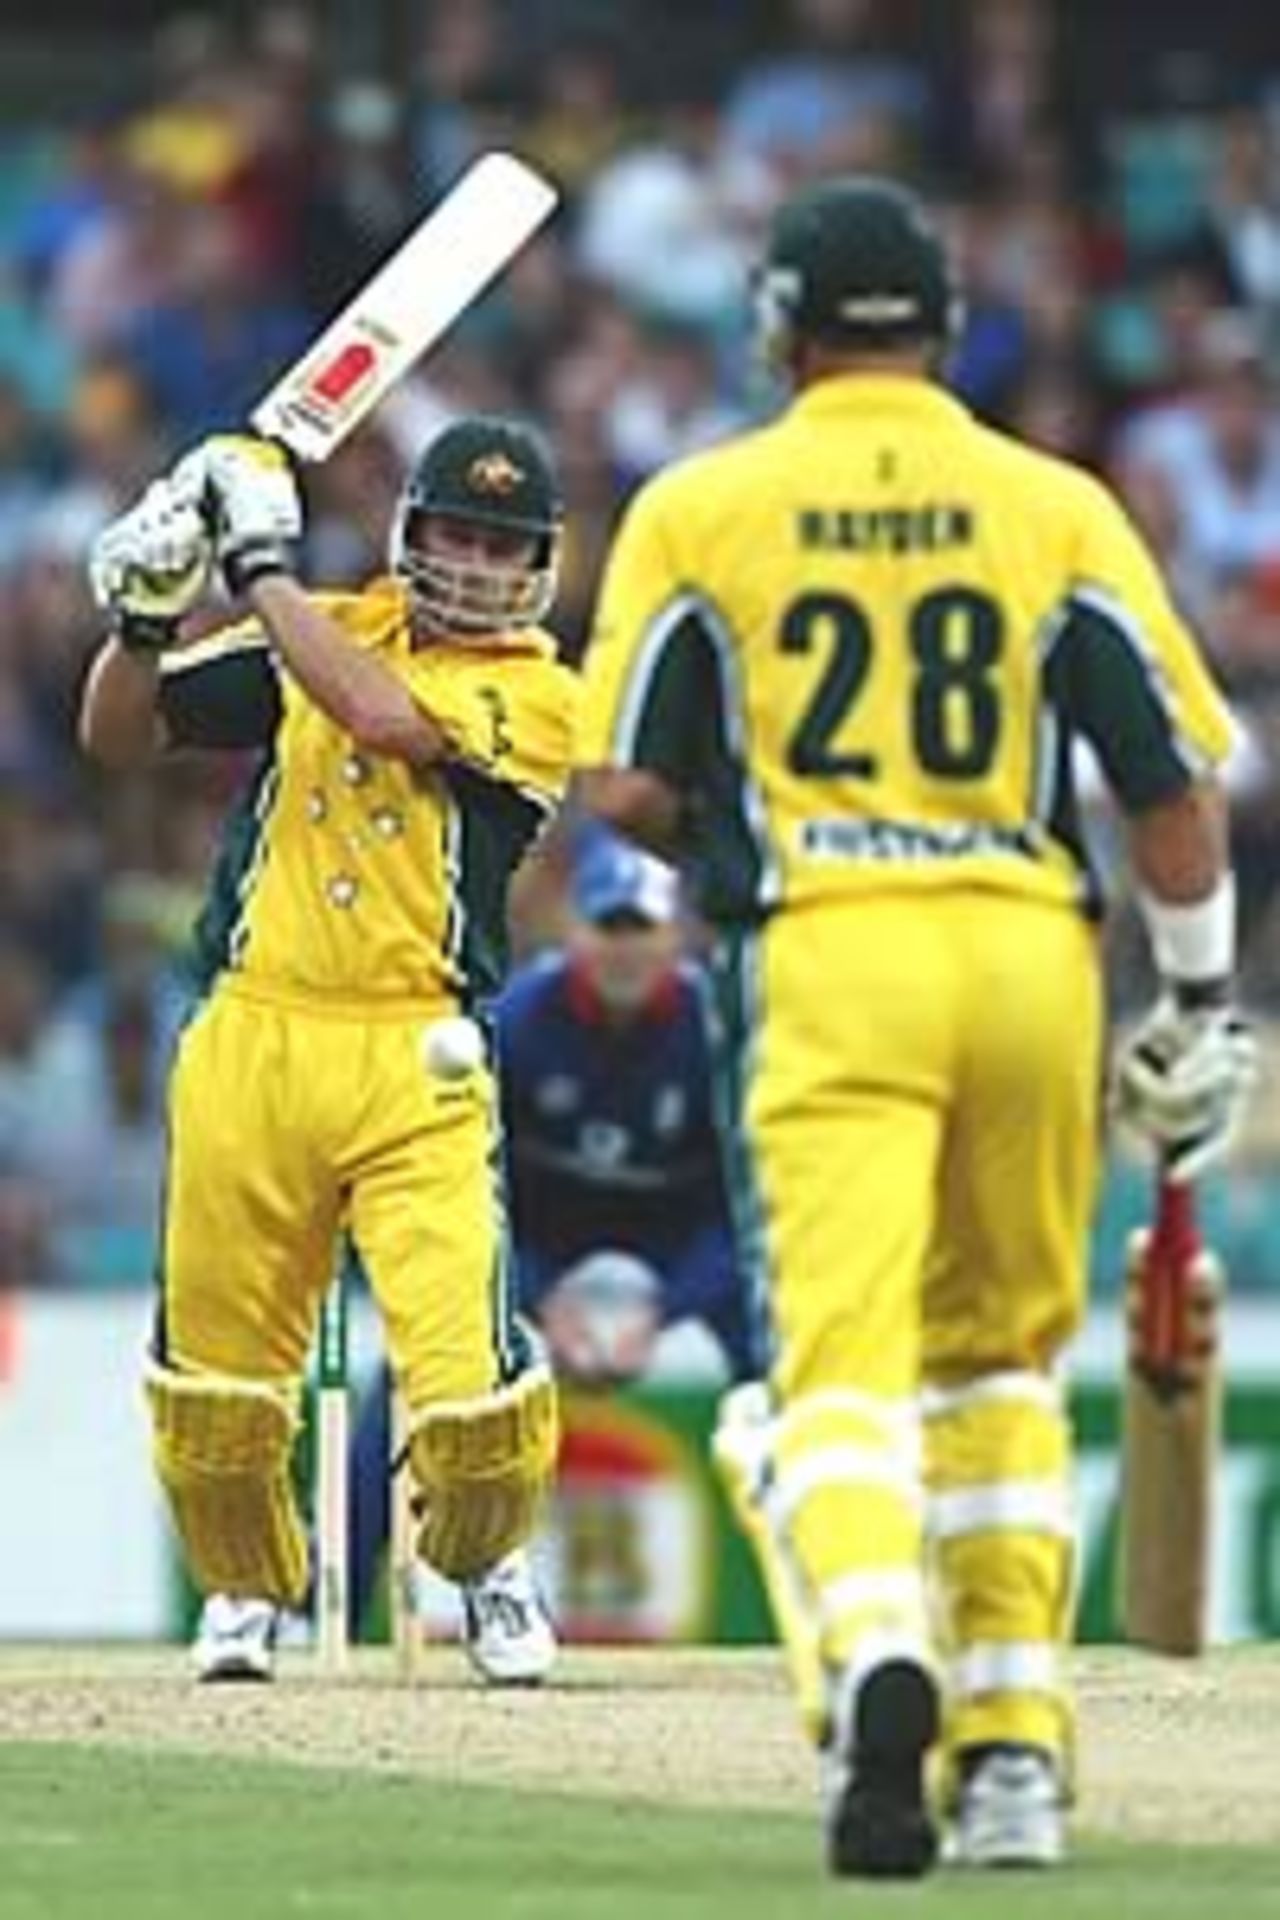 SYDNEY - JANUARY 23: Adam Gilchrist of Australia hits out during the first match in the One Day International finals series between Australia and England at the Sydney Cricket Ground in Sydney, Australia on January 23, 2003.